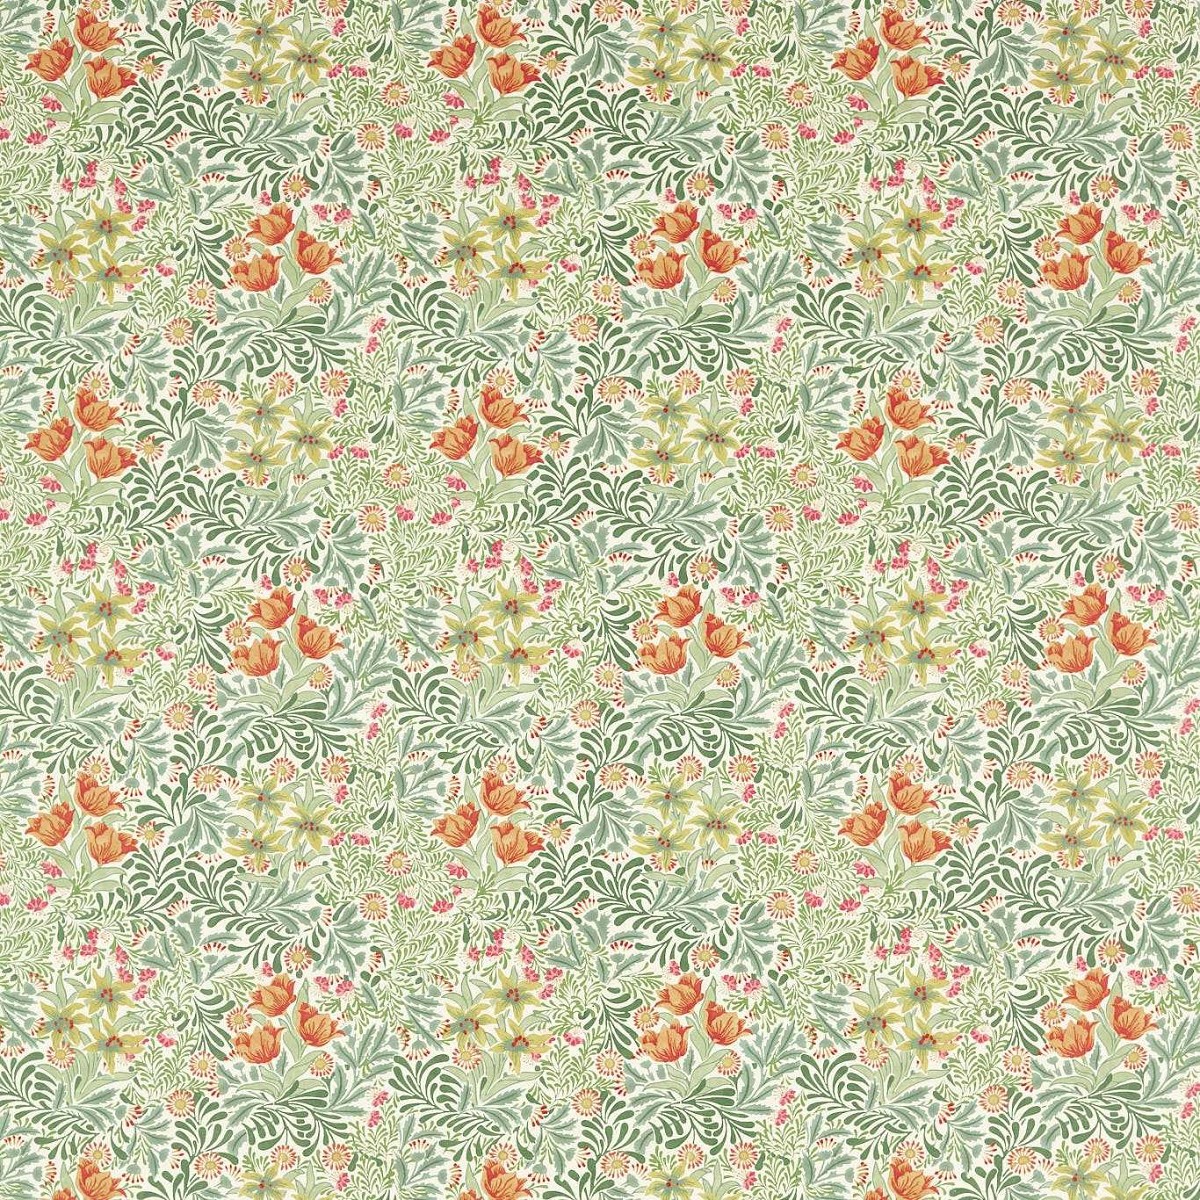 Bower Herball/Weld Fabric by William Morris & Co.